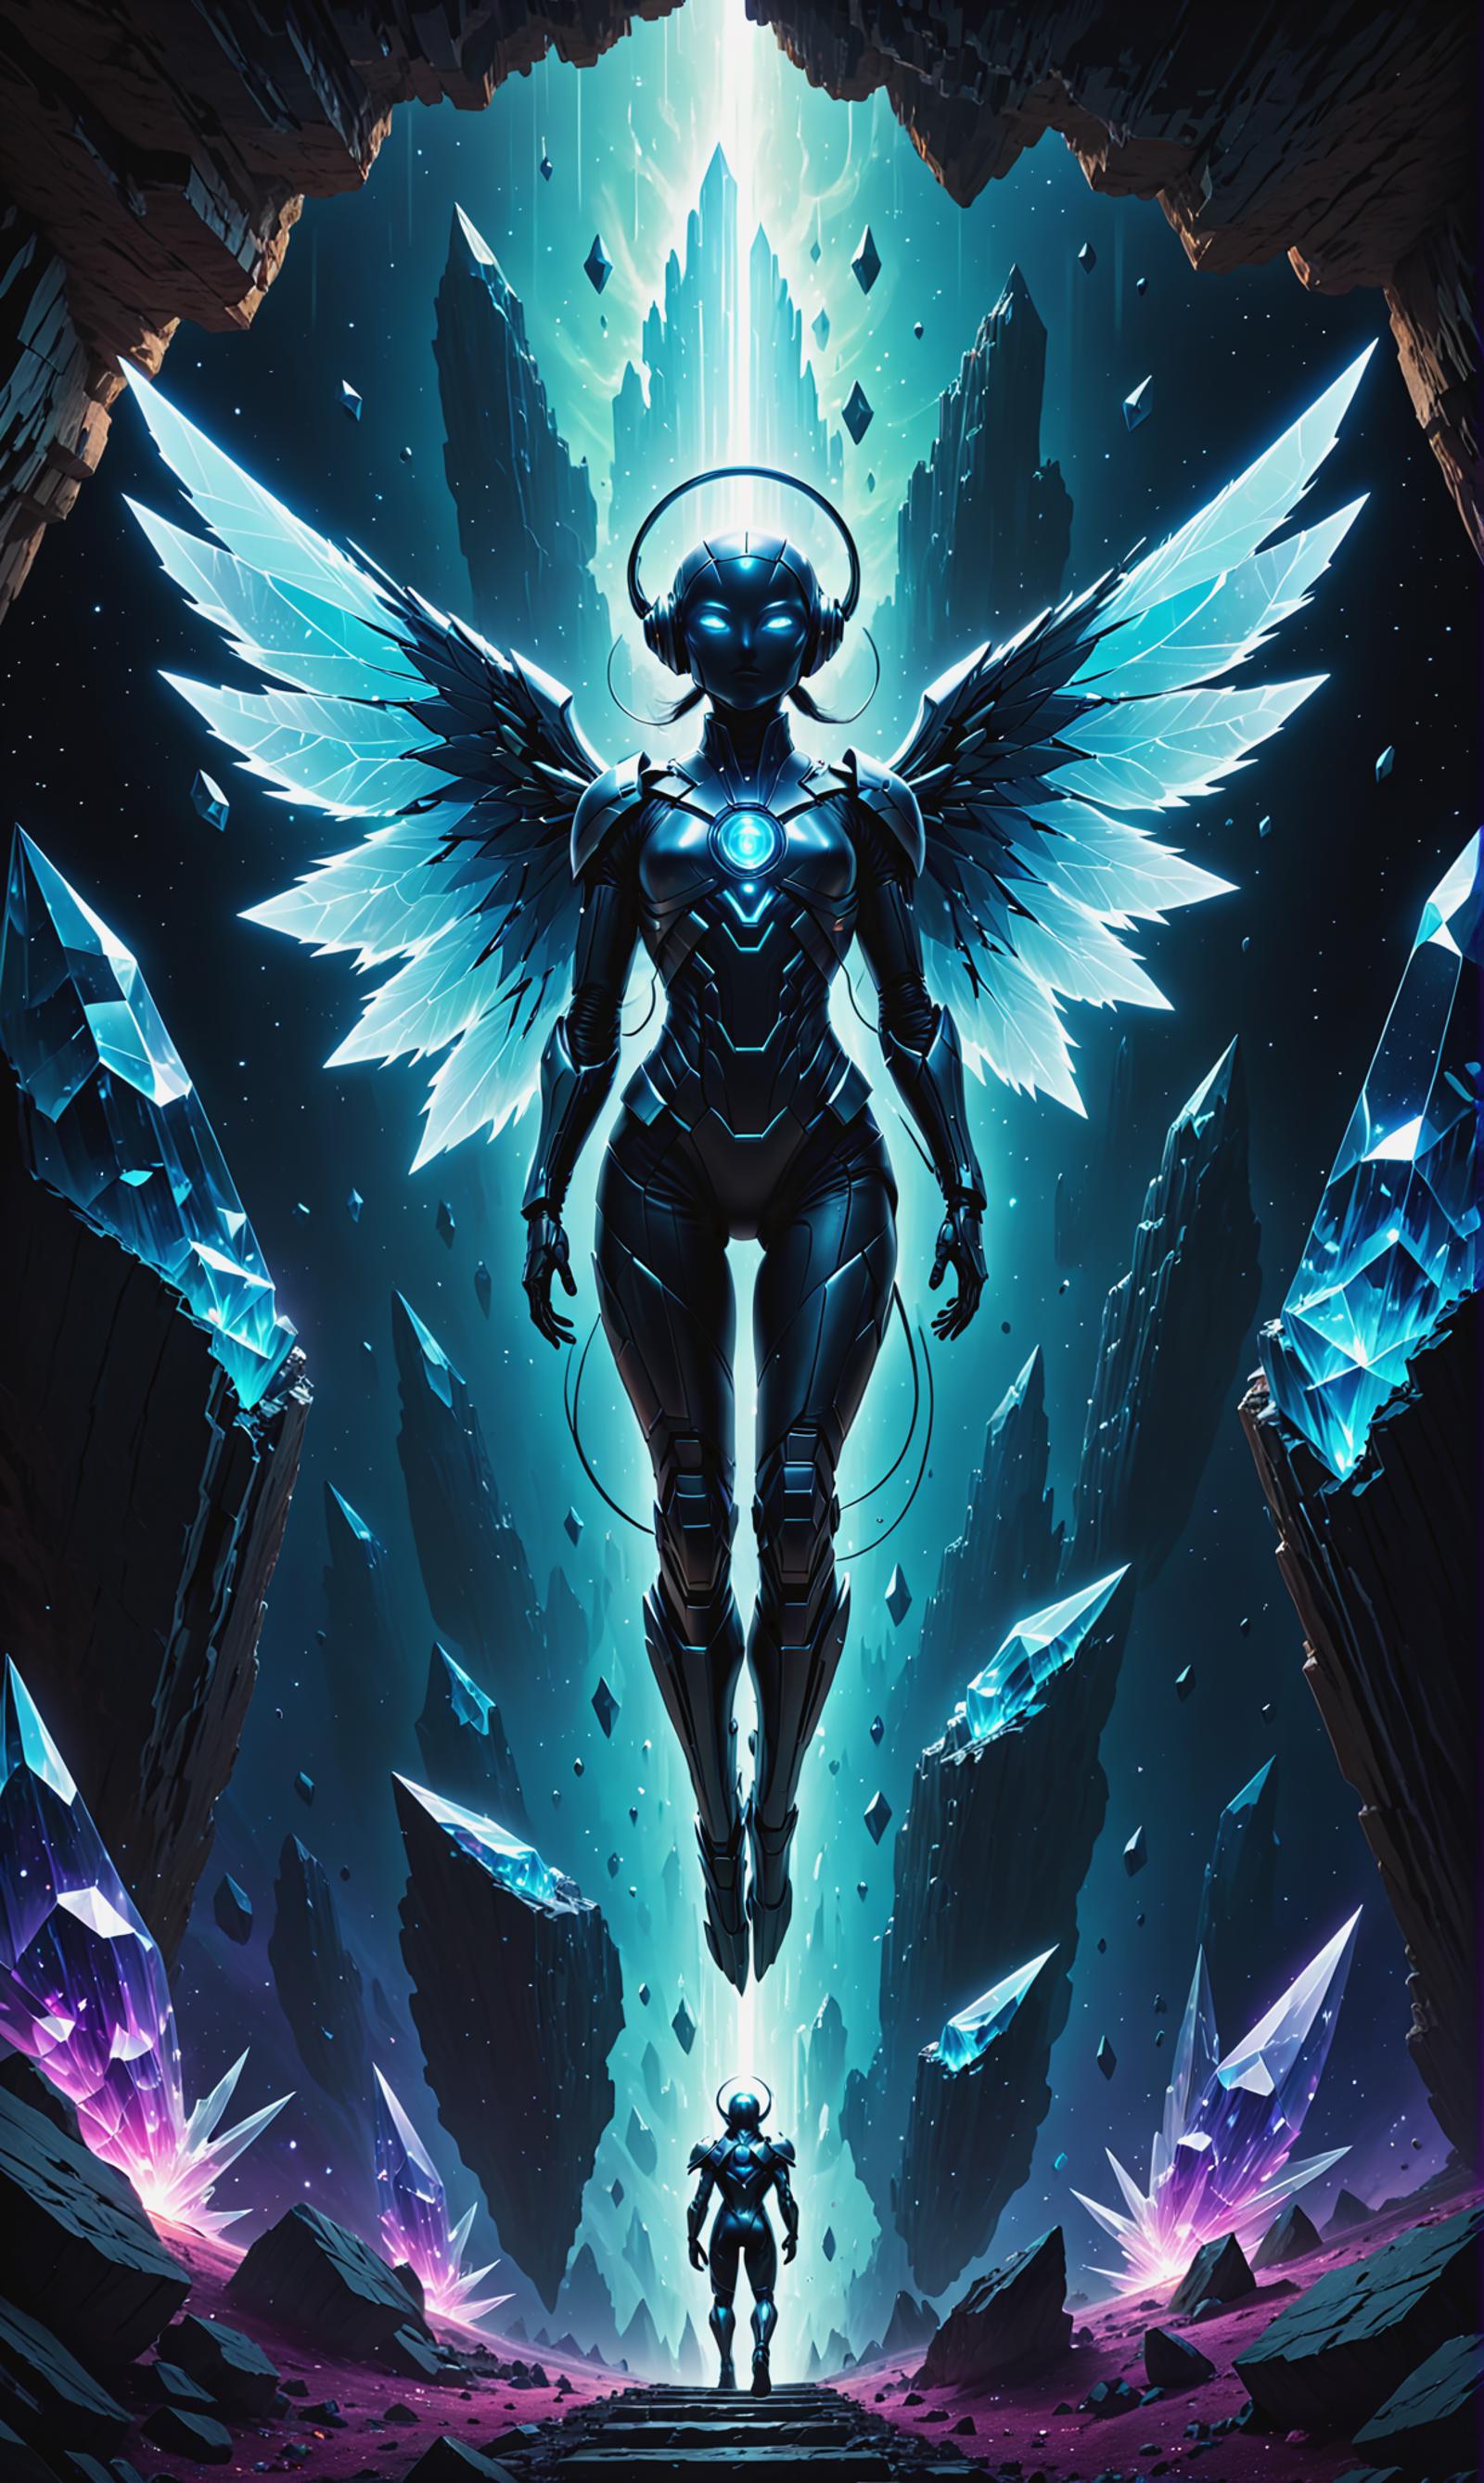 Anime-inspired digital art of a woman with blue wings and a warrior outfit, flying in front of a crystal cave.